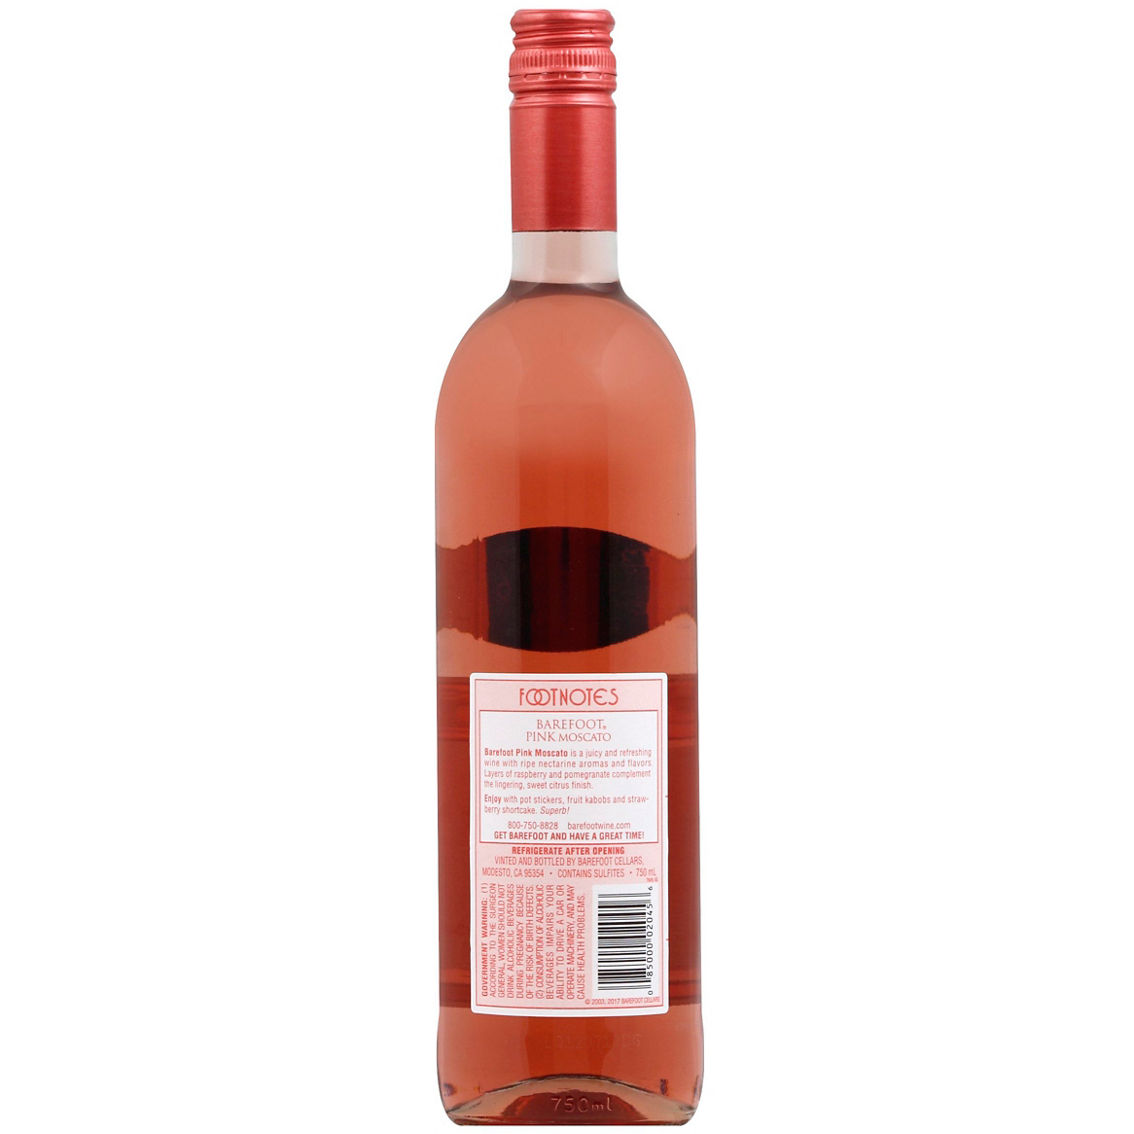 Barefoot Pink Moscato 750ml - Image 2 of 2